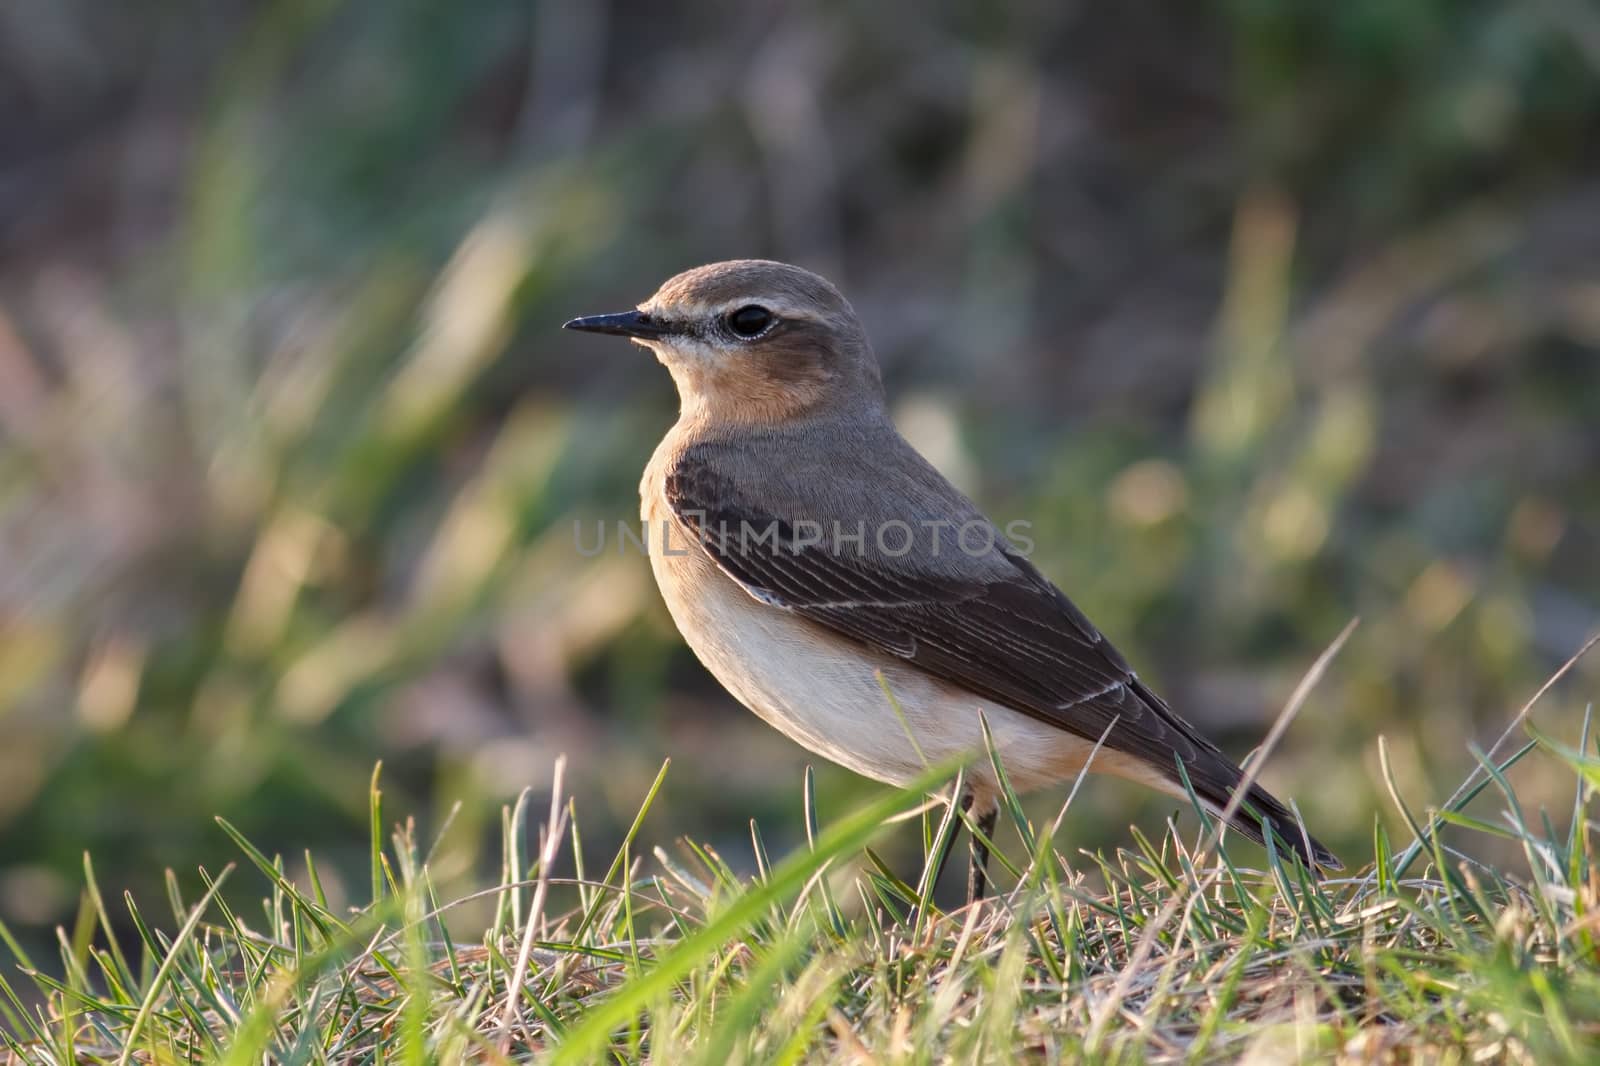 Wheatear (Oenanthe oenanthe) female is sitting in the grass